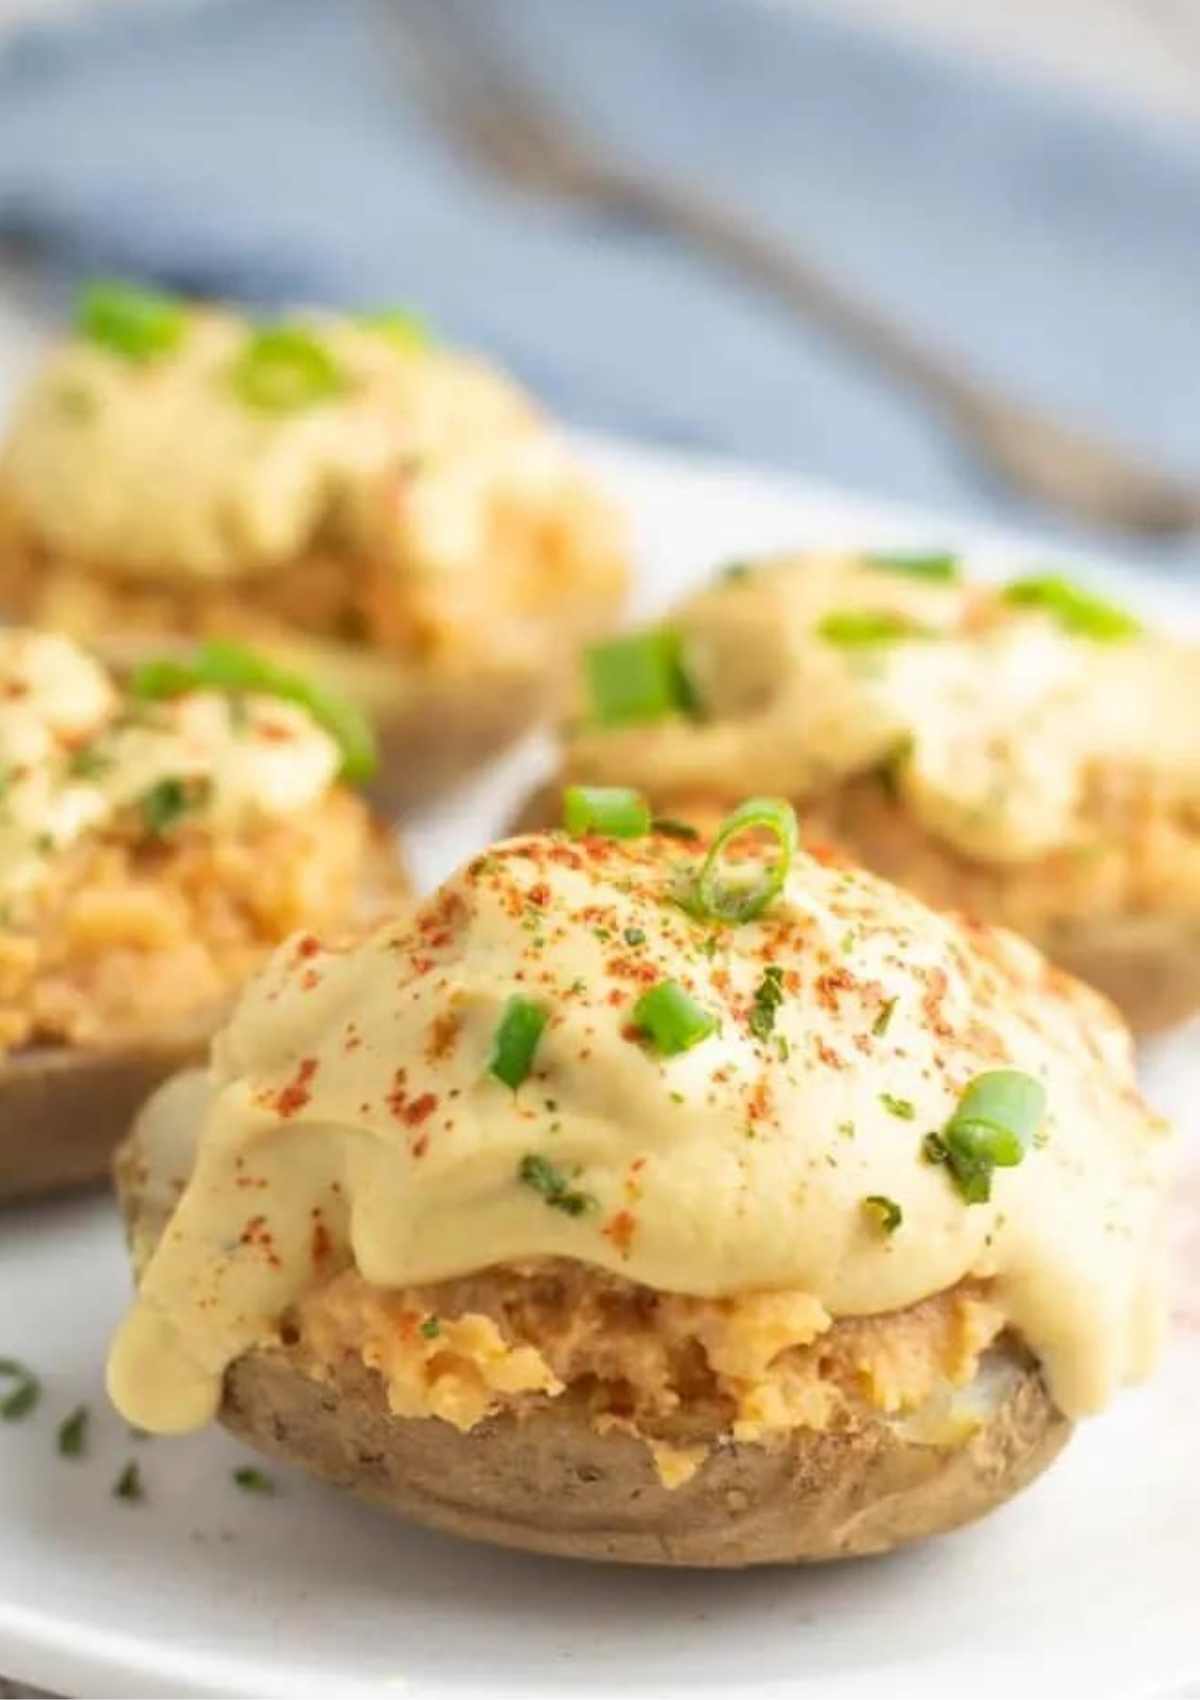 Baked potato topped with cheese